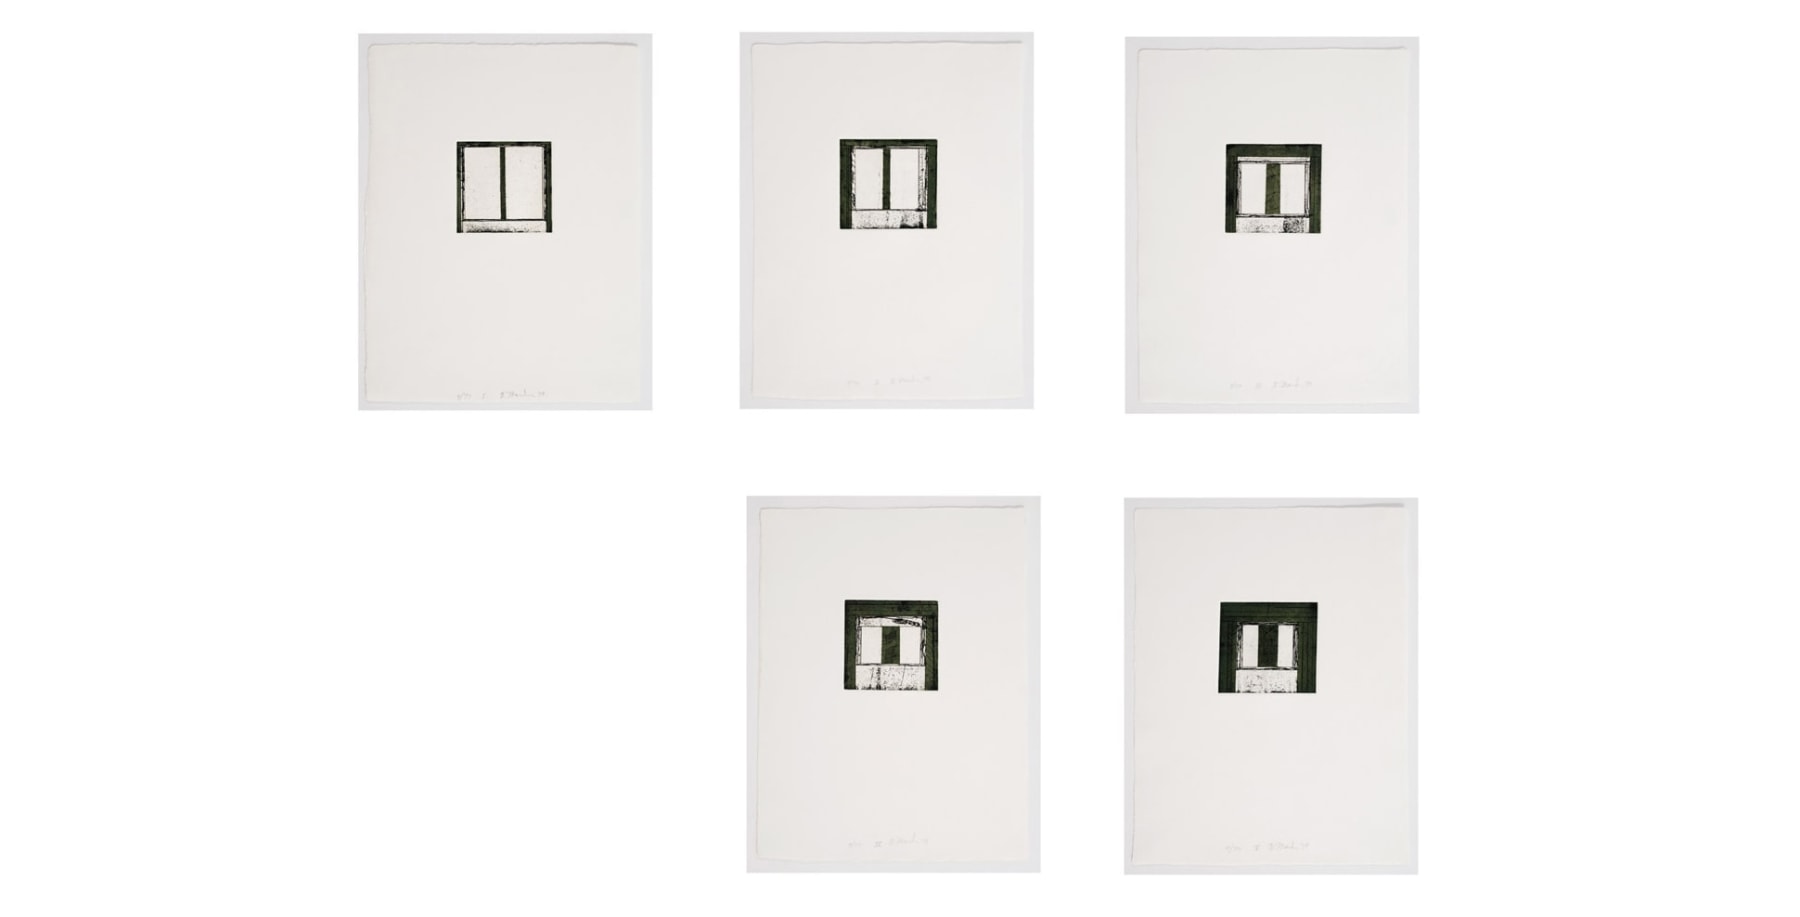 Brice Marden, Focus I-V, 1979-80, Suite of five color etchings with aquatint, 15&quot; x 11&quot; each at Anita Rogers Gallery